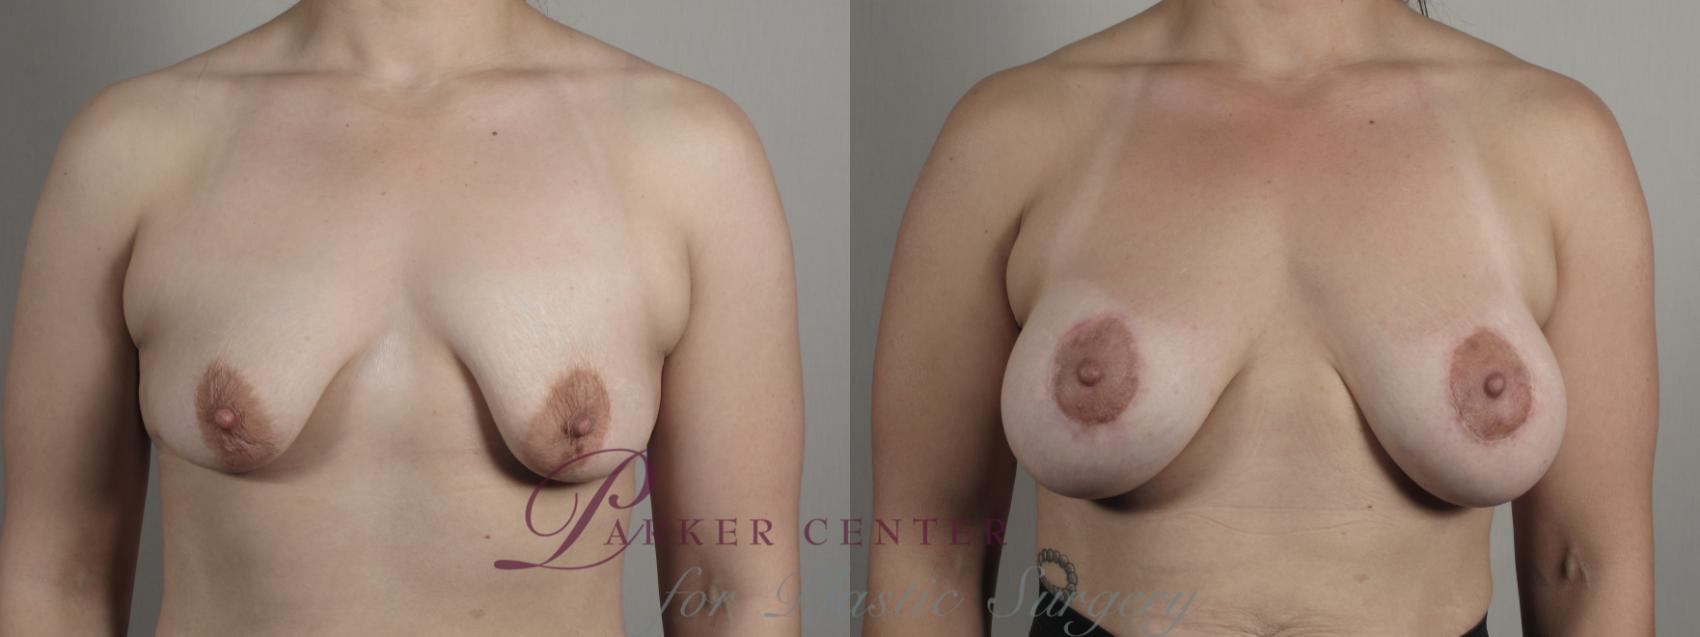 Correction of Tubular Breasts Case 1011 Before & After Front breast tb | Paramus, NJ | Parker Center for Plastic Surgery